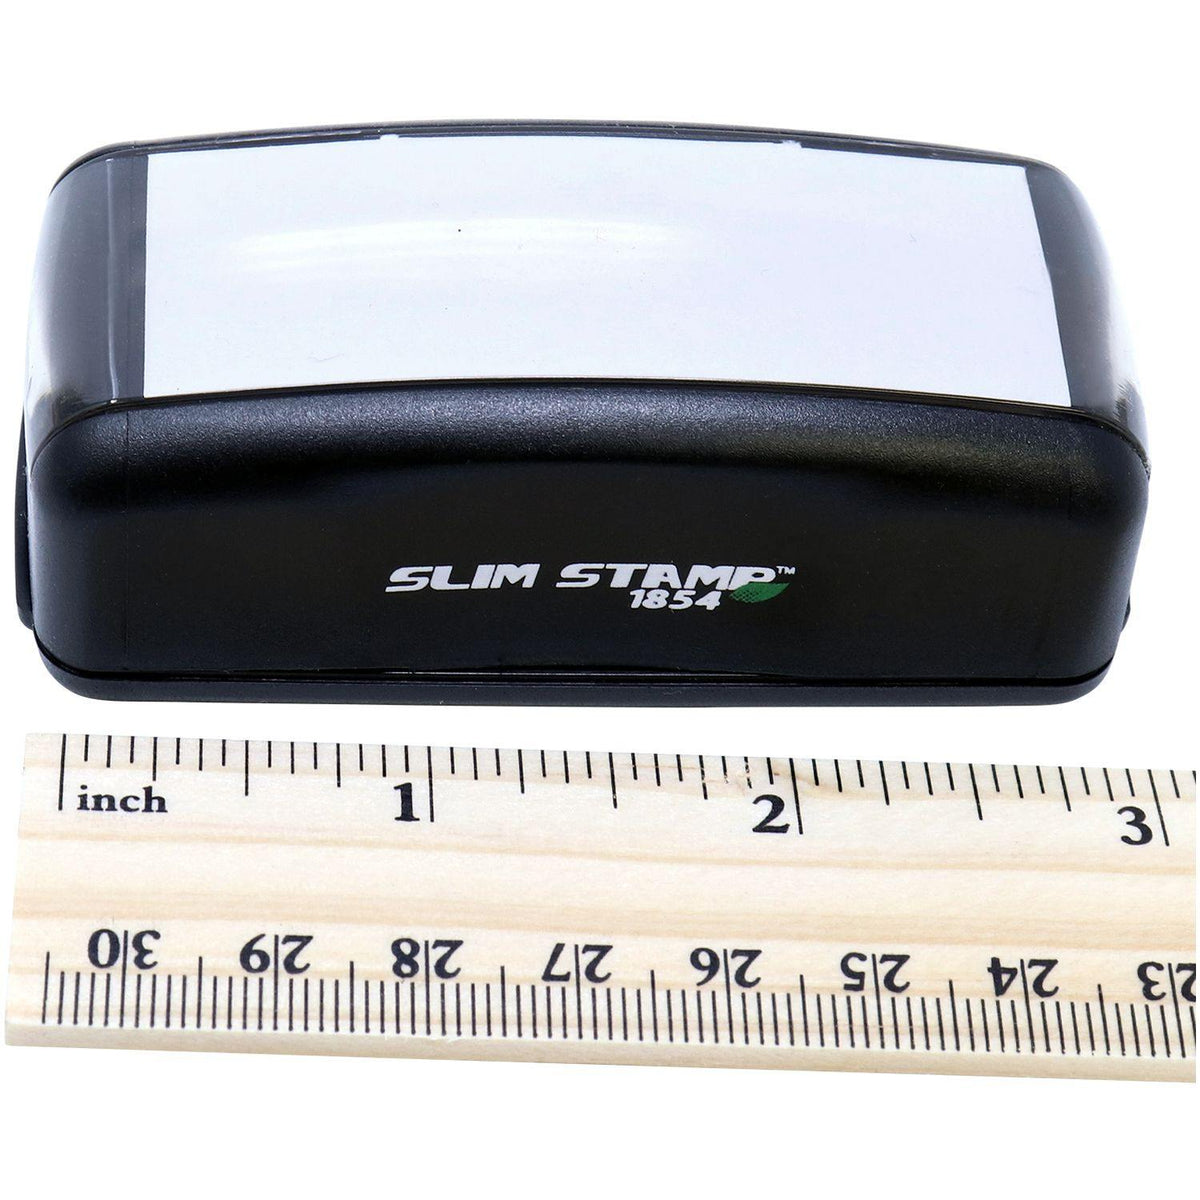 Measurement Large Pre Inked Due Date Stamp with Ruler